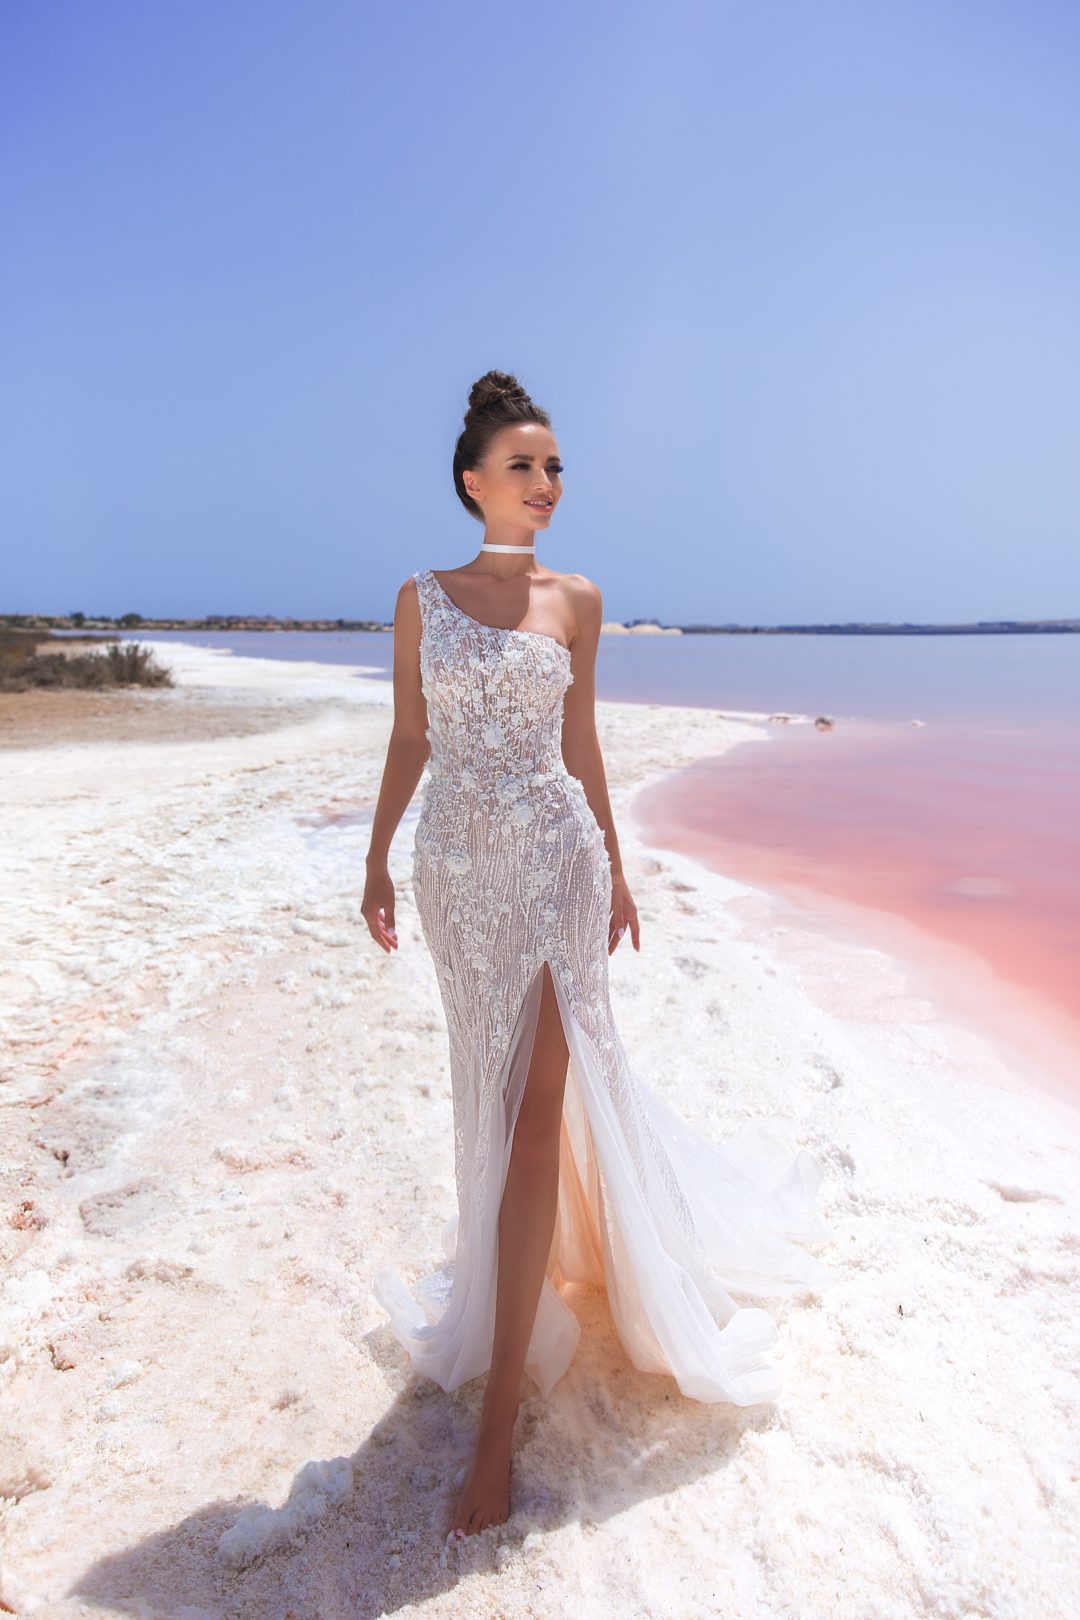 Elena Vasylkova's 8 Collection is for Every Fab Bride